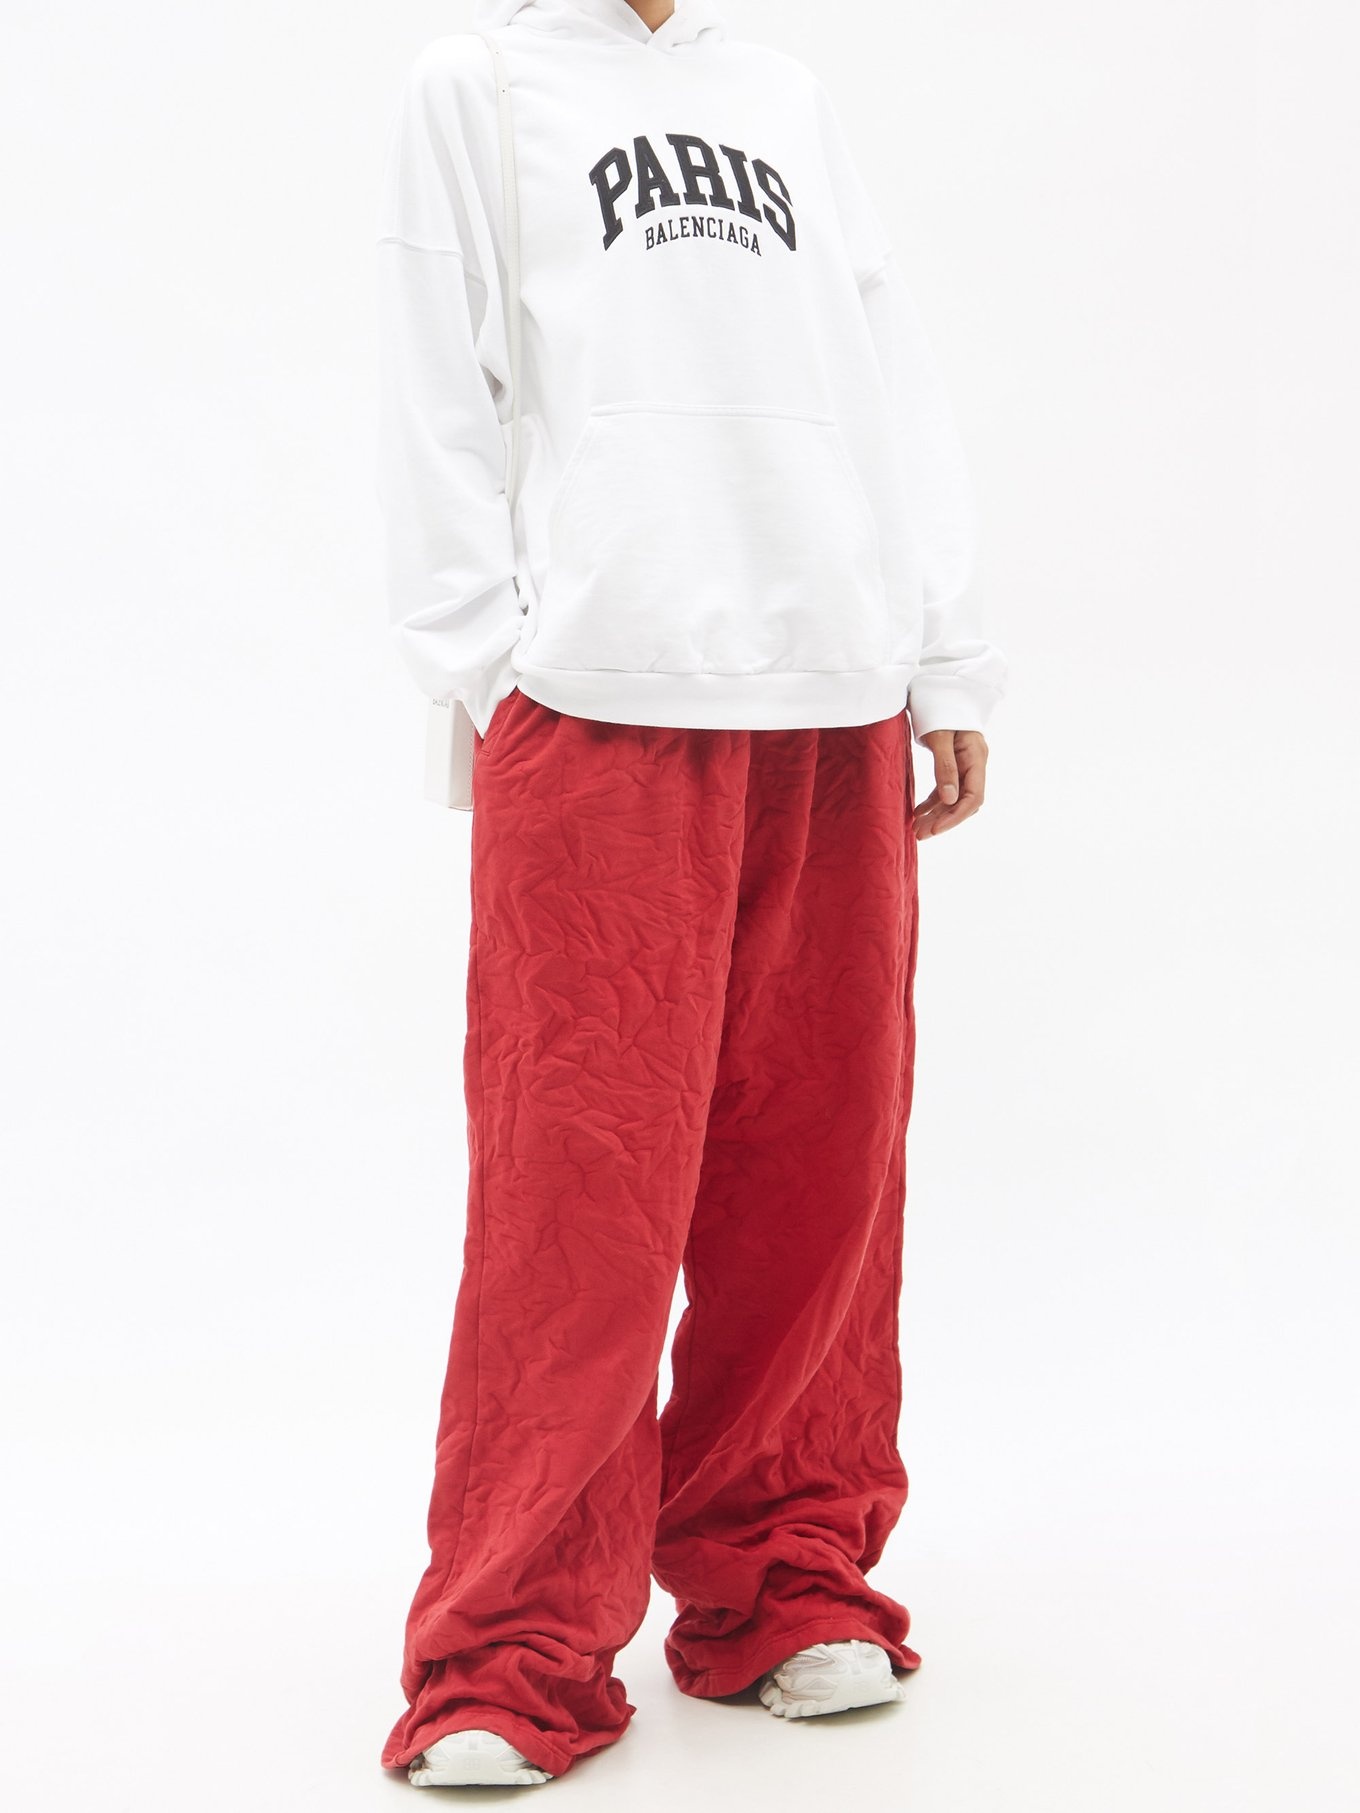 Soccer Baggy Sweatpants in Red/white